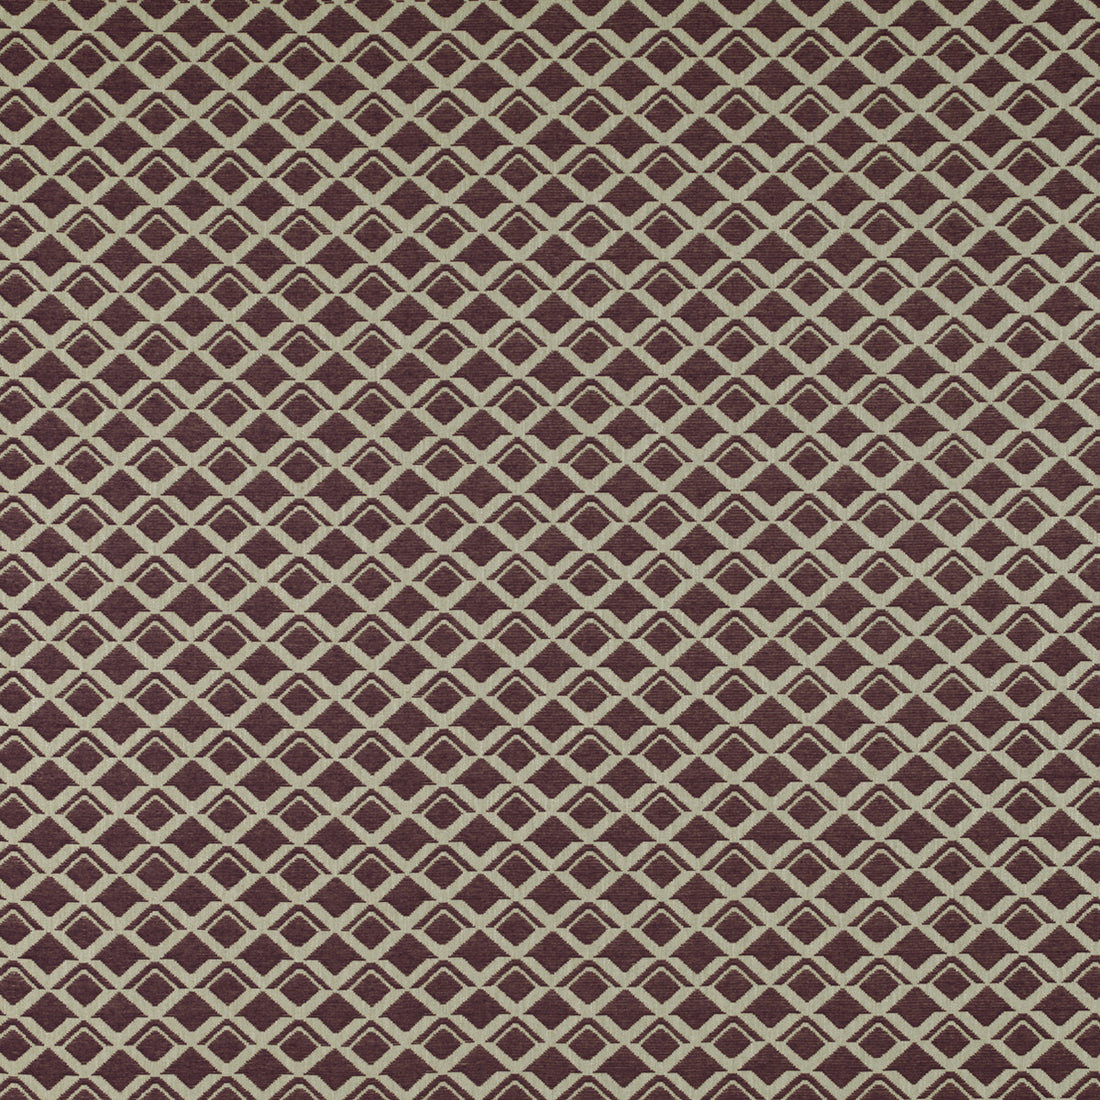 Lodi fabric in burdeos color - pattern GDT5324.005.0 - by Gaston y Daniela in the Tierras collection